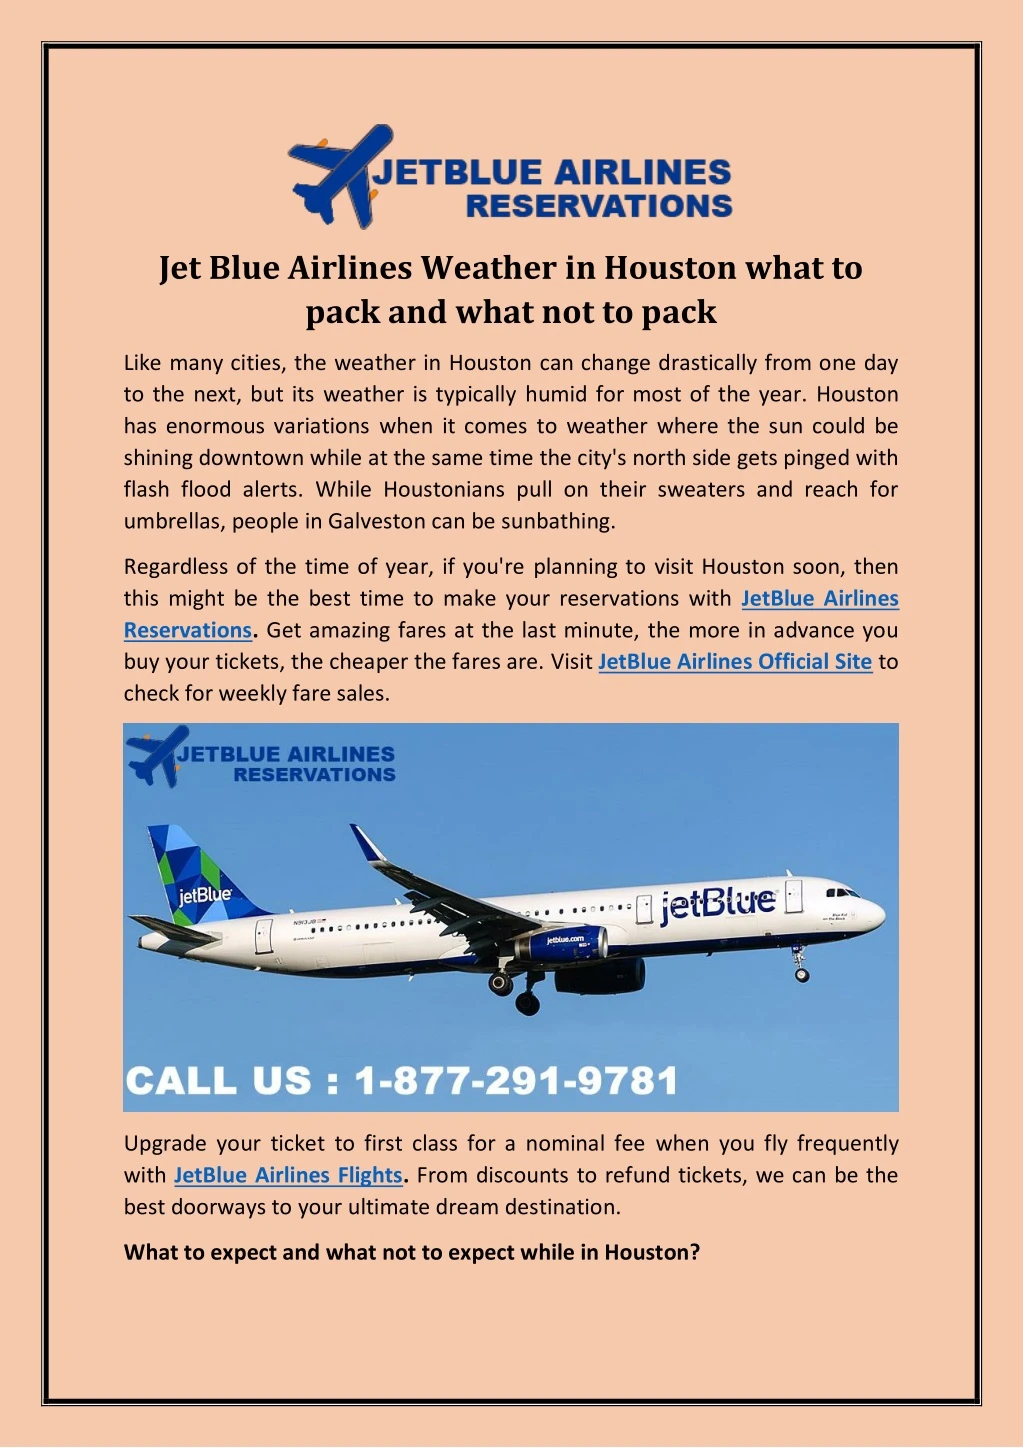 jet blue airlines weather in houston what to pack